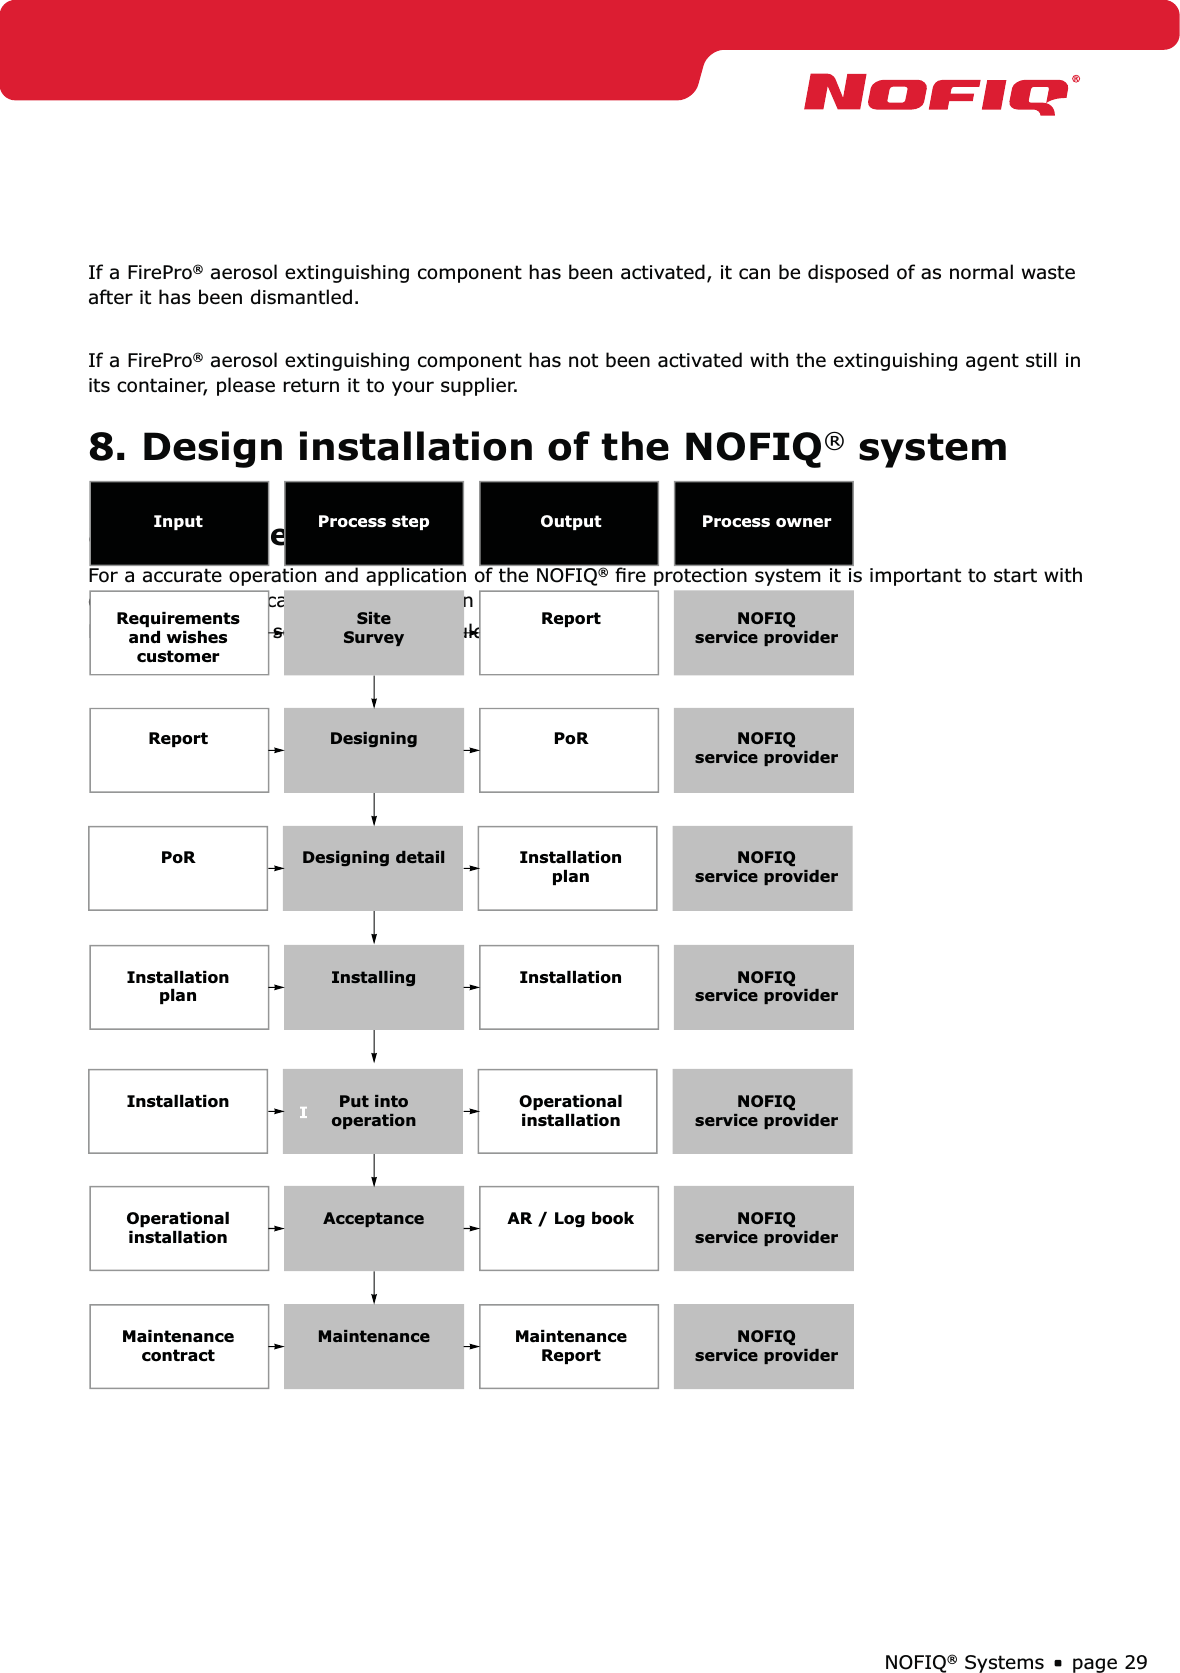 page 29NOFIQ® SystemsIf a FirePro® aerosol extinguishing component has been activated, it can be disposed of as normal waste after it has been dismantled.If a FirePro® aerosol extinguishing component has not been activated with the extinguishing agent still in its container, please return it to your supplier.8. Design installation of the NOFIQ® system8.1 GeneralFor a accurate operation and application of the NOFIQ® ﬁre protection system it is important to start with designing the application and installation of the system. Hereto the process schedule below should be used. MaintenancecontractOperationalinstallationInstallationInstallationplanPoRReportRequirementsand wishescustomerInputMaintenanceAcceptancePut into operationInstallingDesigning detailDesigningSiteSurveyProcess stepMaintenanceReportAR / Log bookOperationalinstallationInstallationInstallationplanPoRReportOutputNOFIQservice providerNOFIQservice providerNOFIQservice providerNOFIQservice providerNOFIQservice providerNOFIQservice providerNOFIQservice providerProcess owner